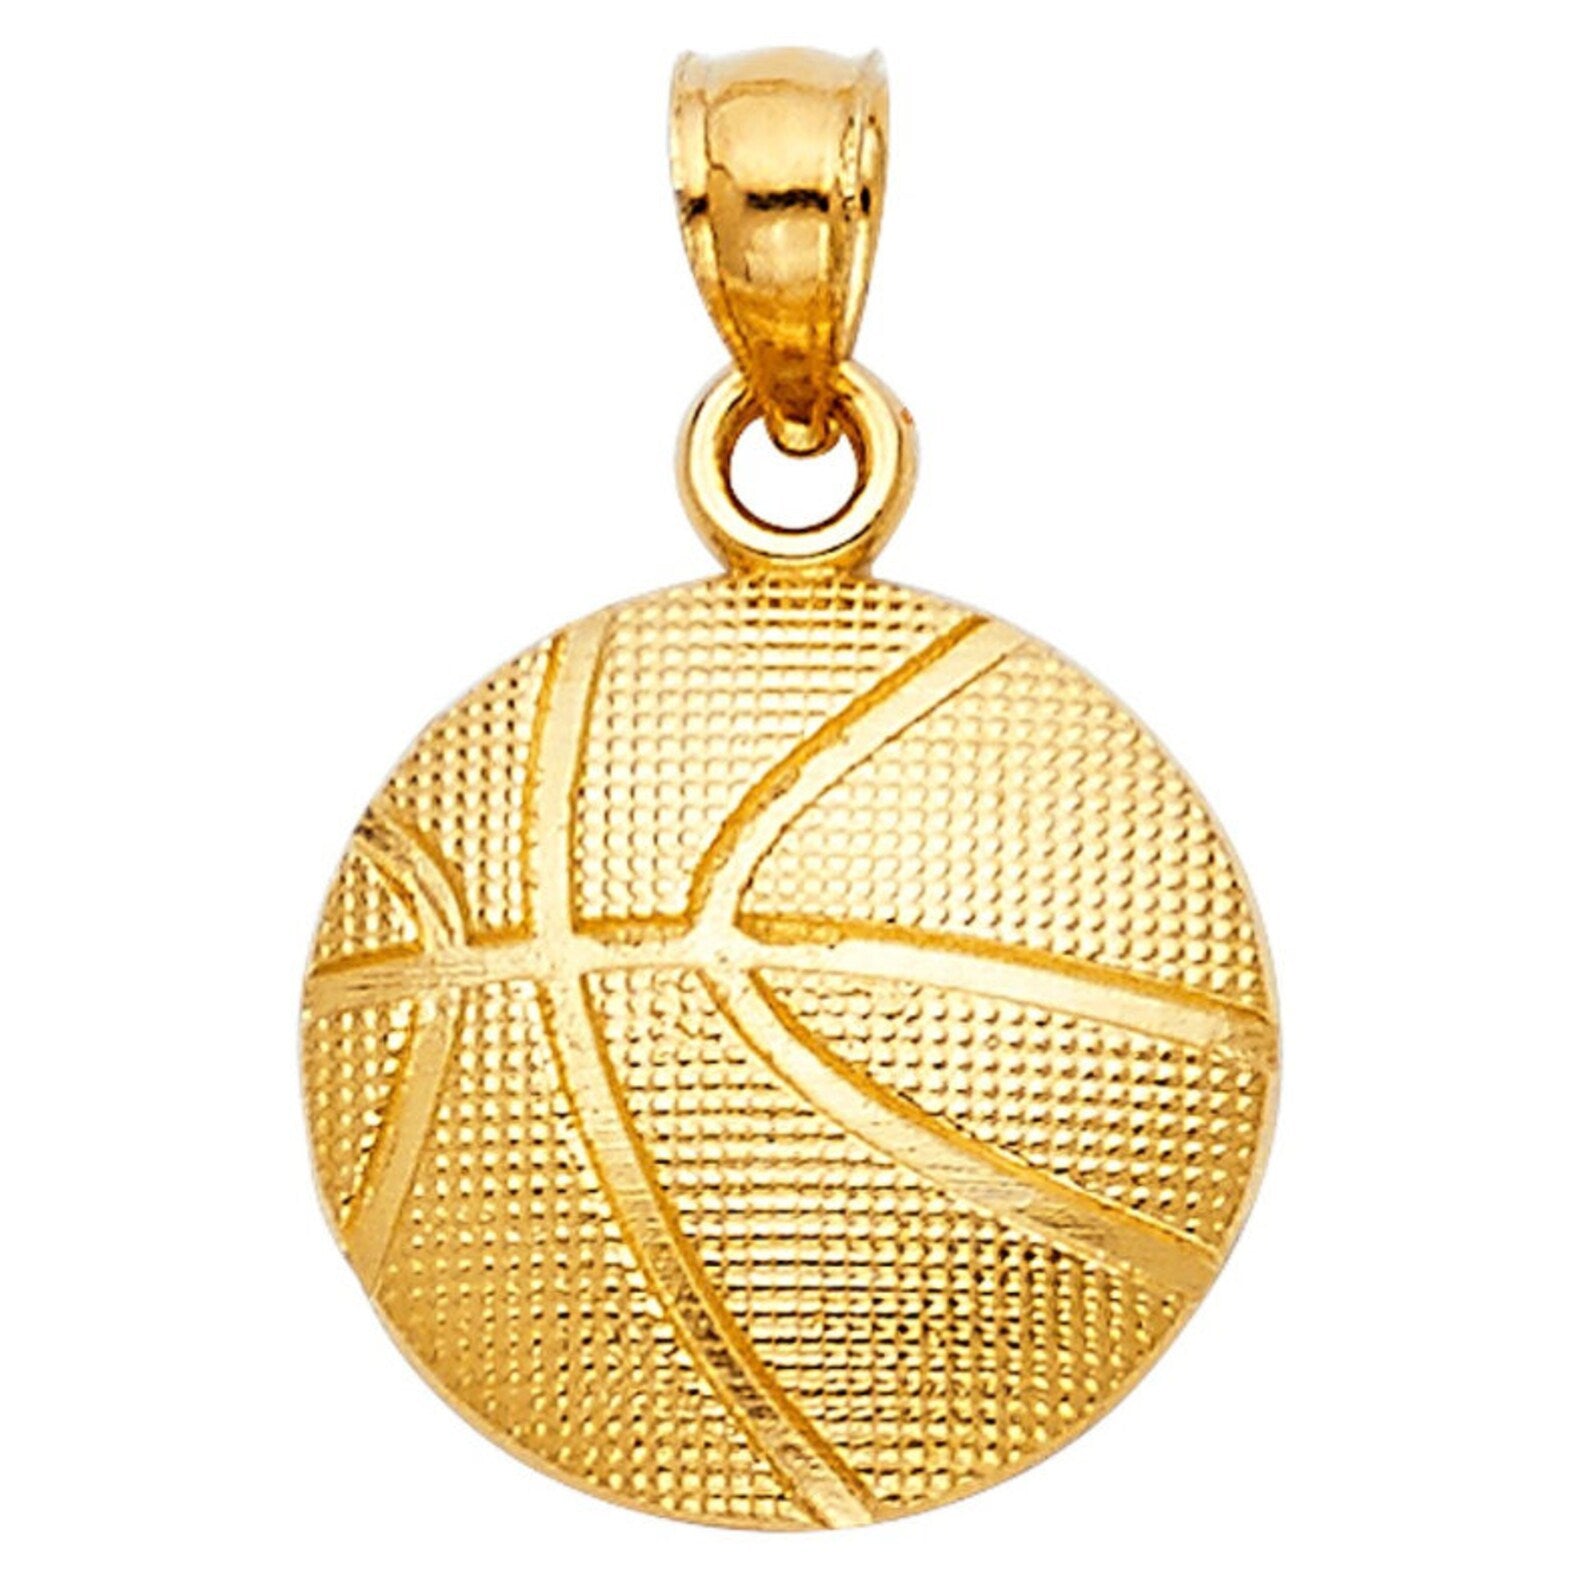 Gold Basketball Pendant Model-1976 - Charlie & Co. Jewelry